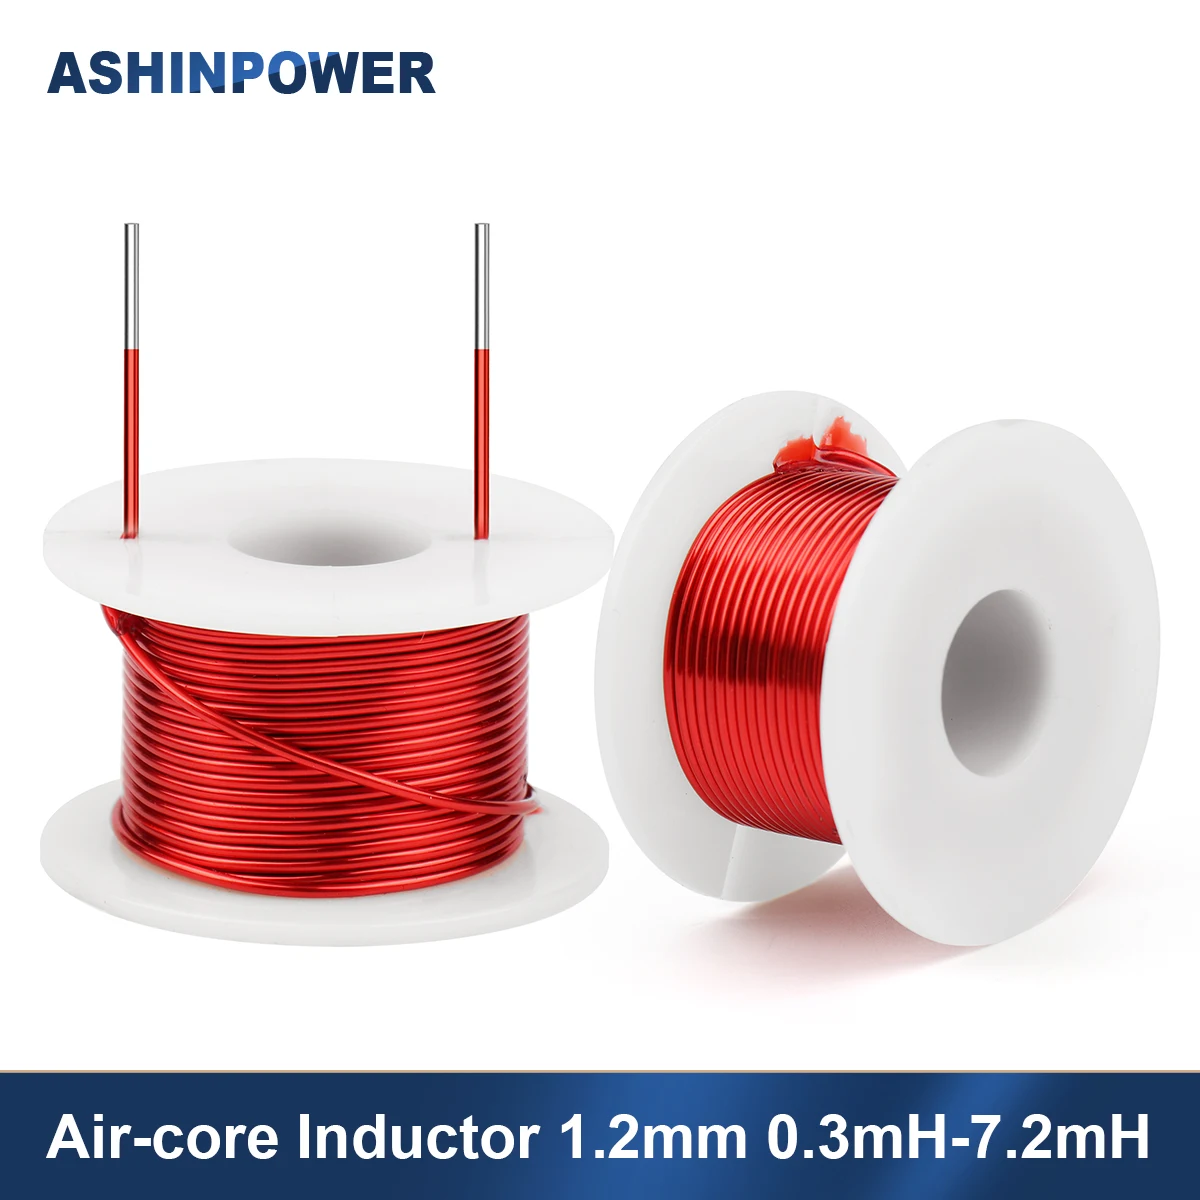 

1Pcs Air-core Inductor Oxygen-Free Copper Inductors 1.2mm 0.3mH-7.2mH Speaker Crossover Hollow Frame Coil Frequency Divider Coil